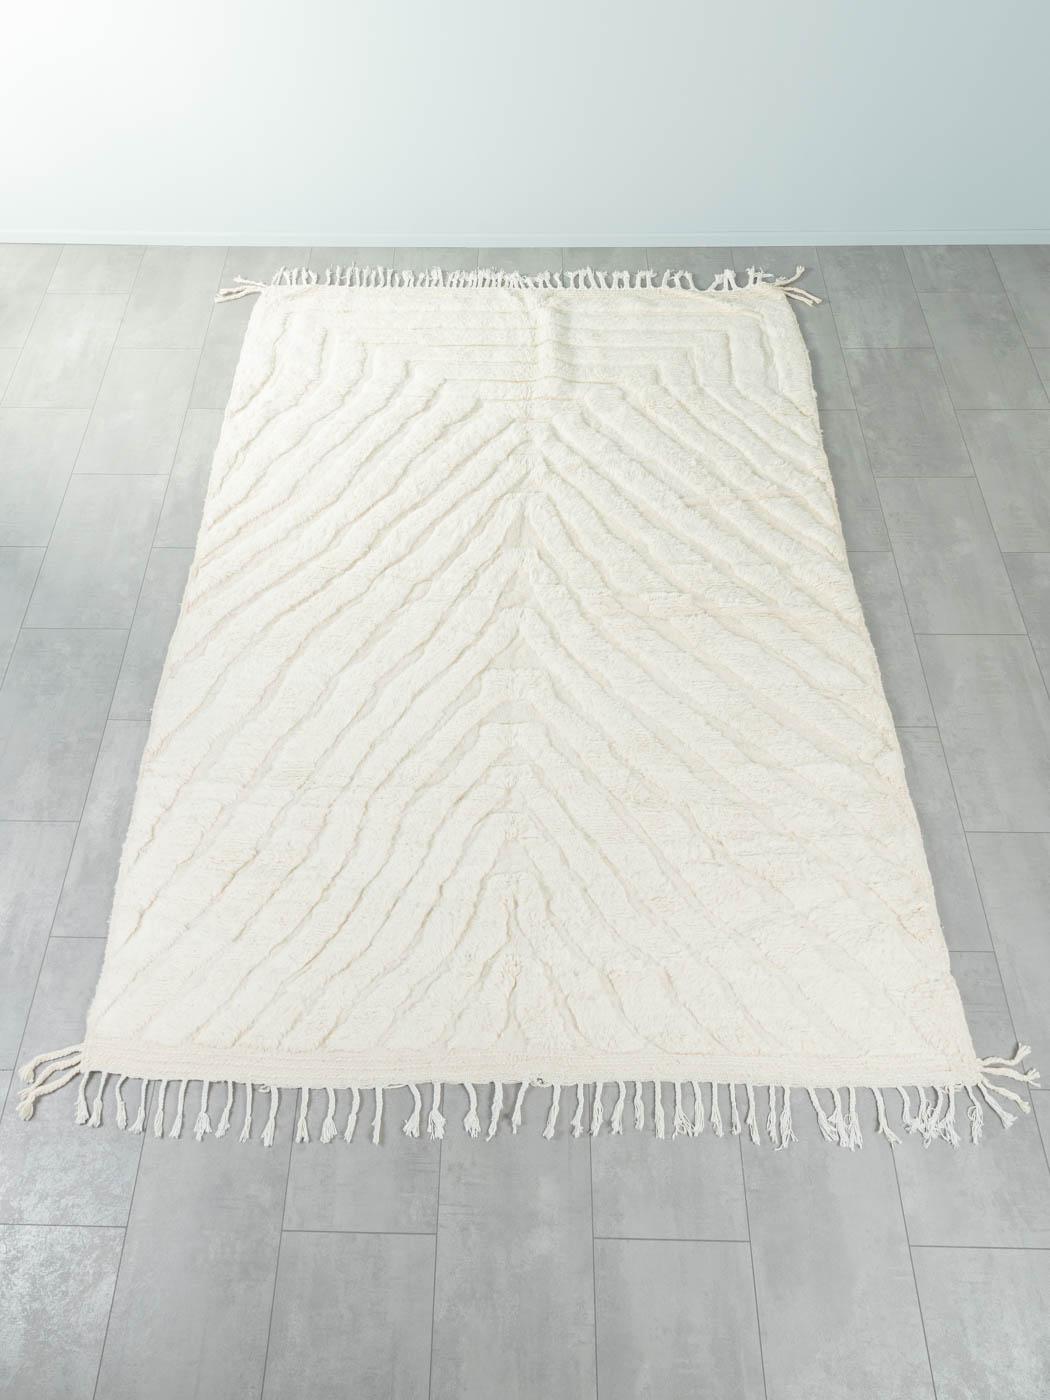 Flowing Water is a contemporary 100% wool rug – thick and soft, comfortable underfoot. Our Berber rugs are handwoven and handknotted by Amazigh women in the Atlas Mountains. These communities have been crafting rugs for thousands of years. One knot